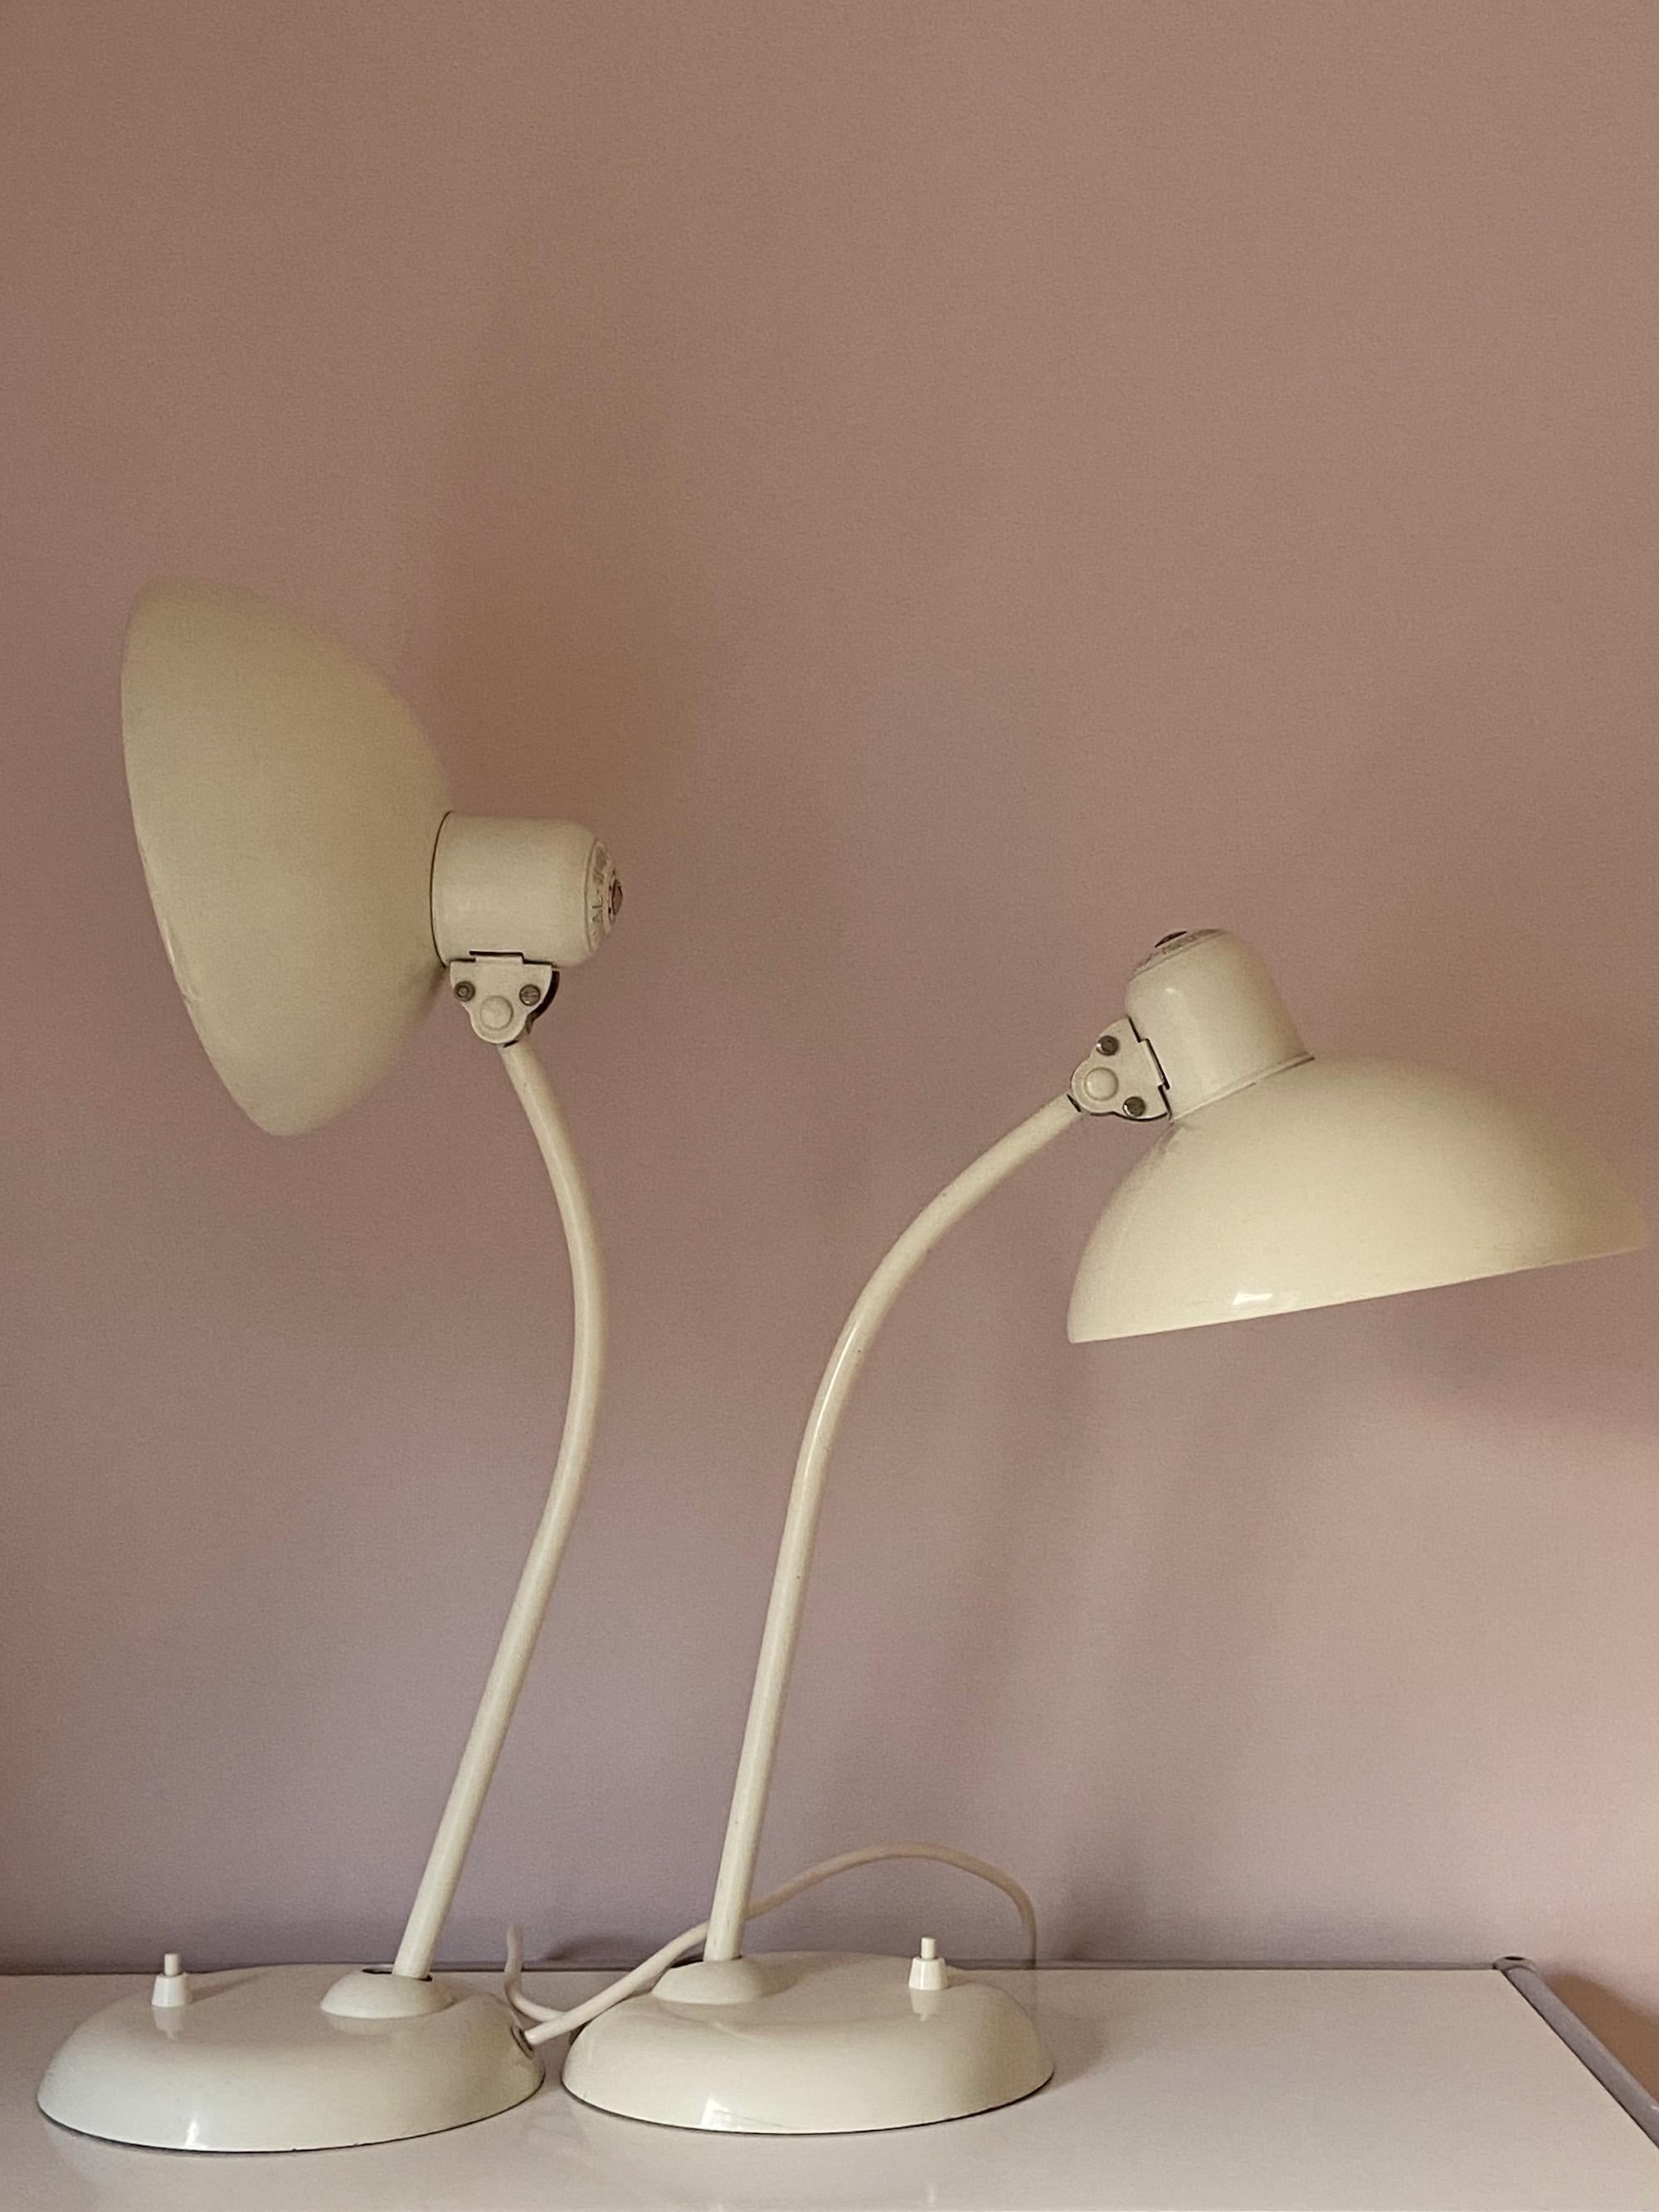 20th Century Set of 2 Christian Dell Table Lamps 6556 by Kaiser Idell Bauhaus, Germany